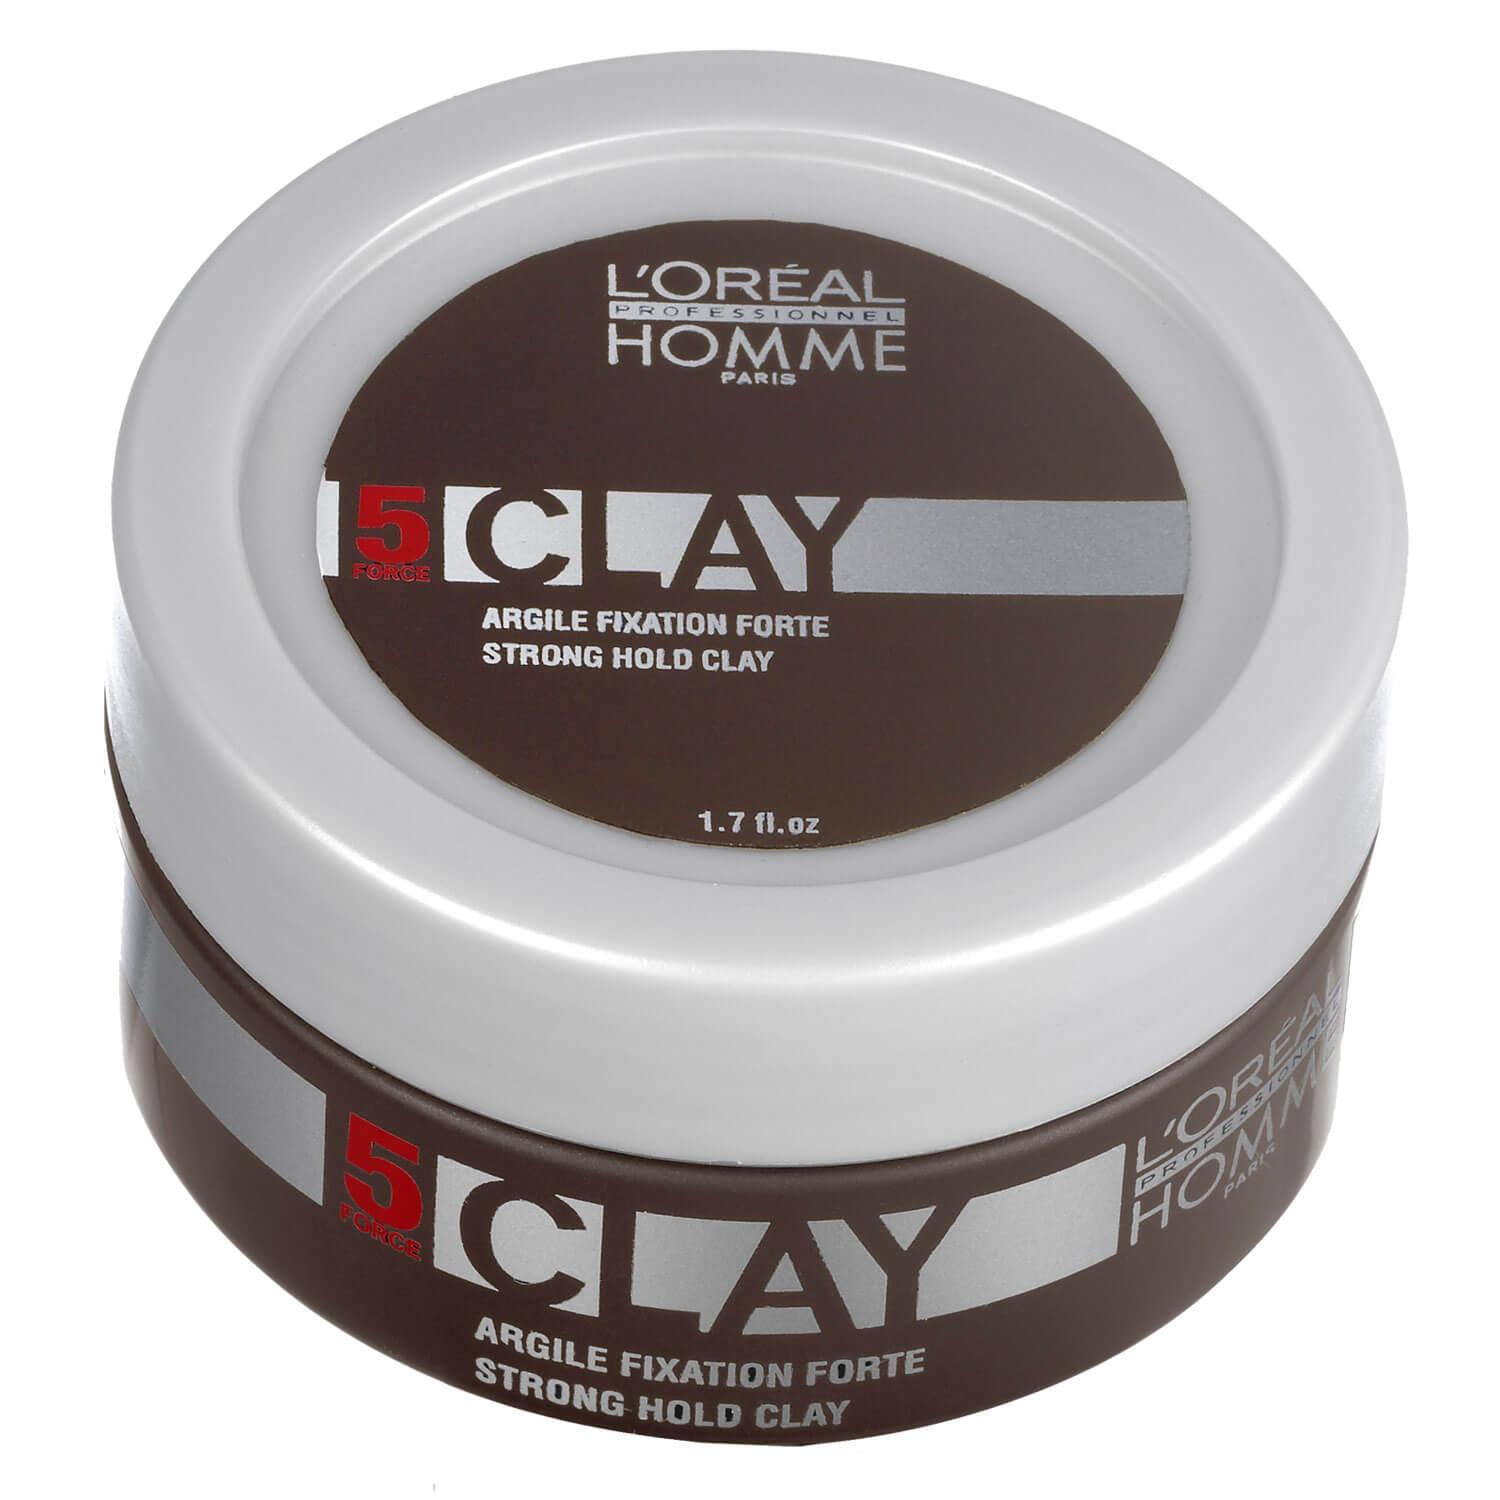 Homme - Clay